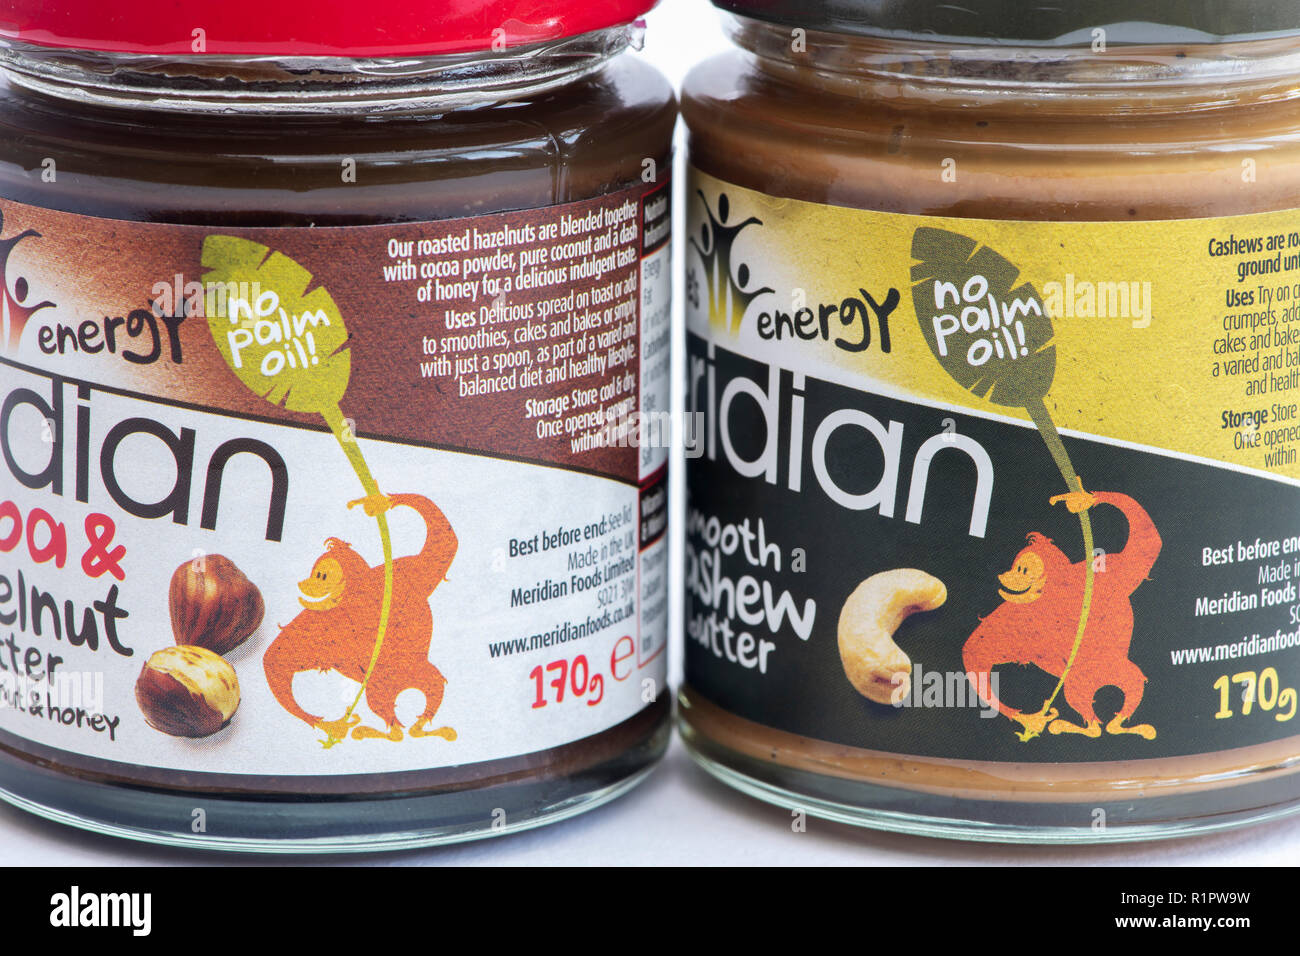 Meridian nut butter jars with No palm oil label Stock Photo